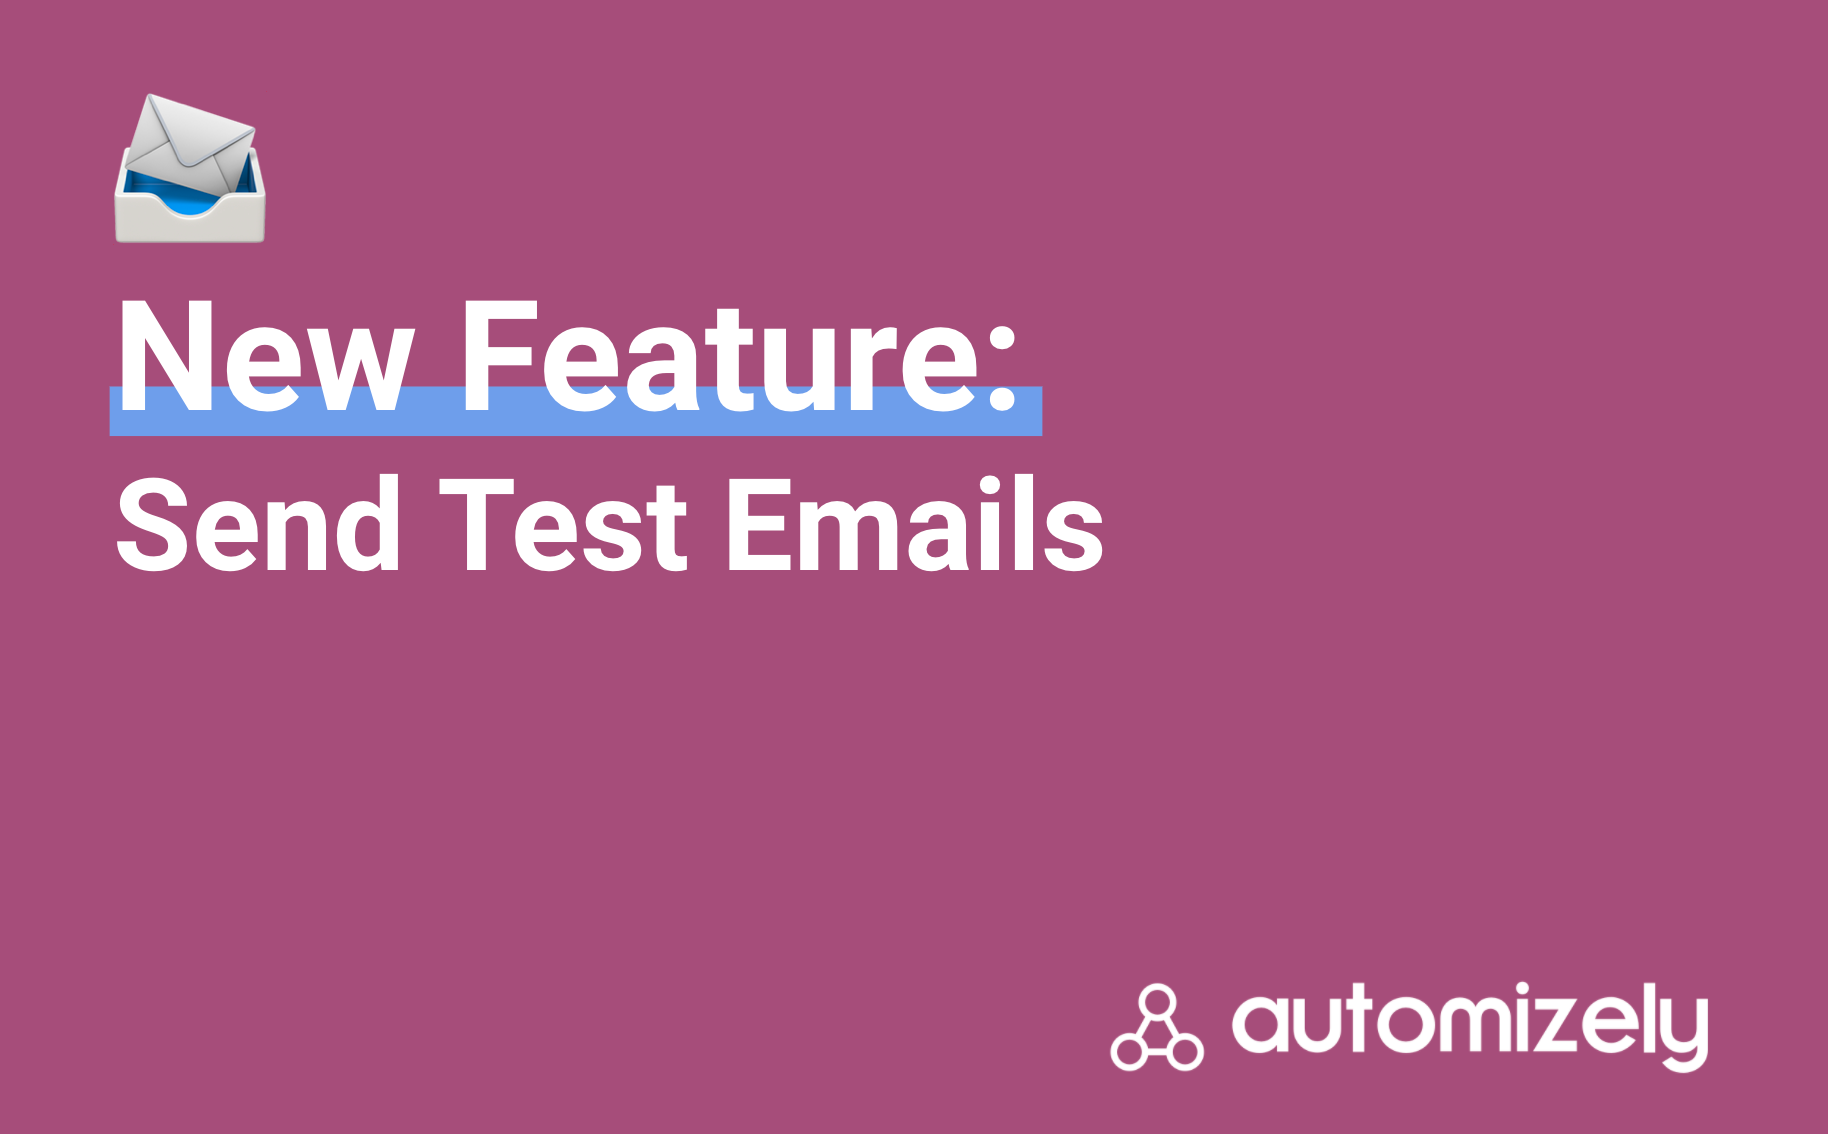 New Feature: Send Test Emails